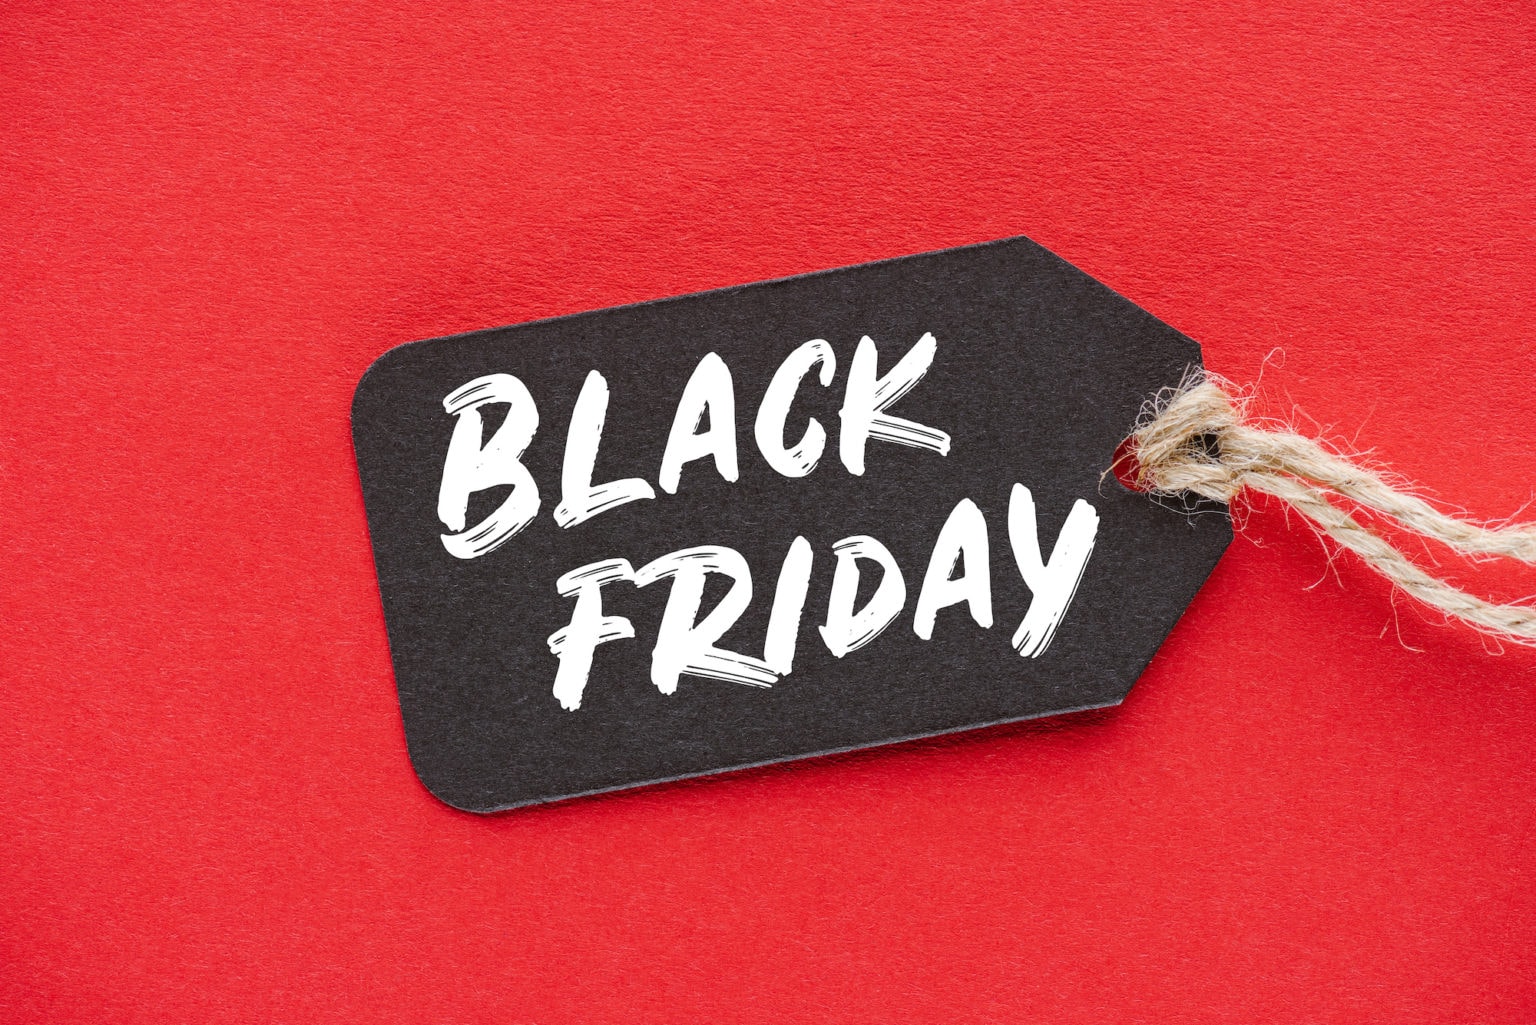 here-are-some-black-friday-deals-you-can-score-while-you-re-in-those-black-friday-lines-deals